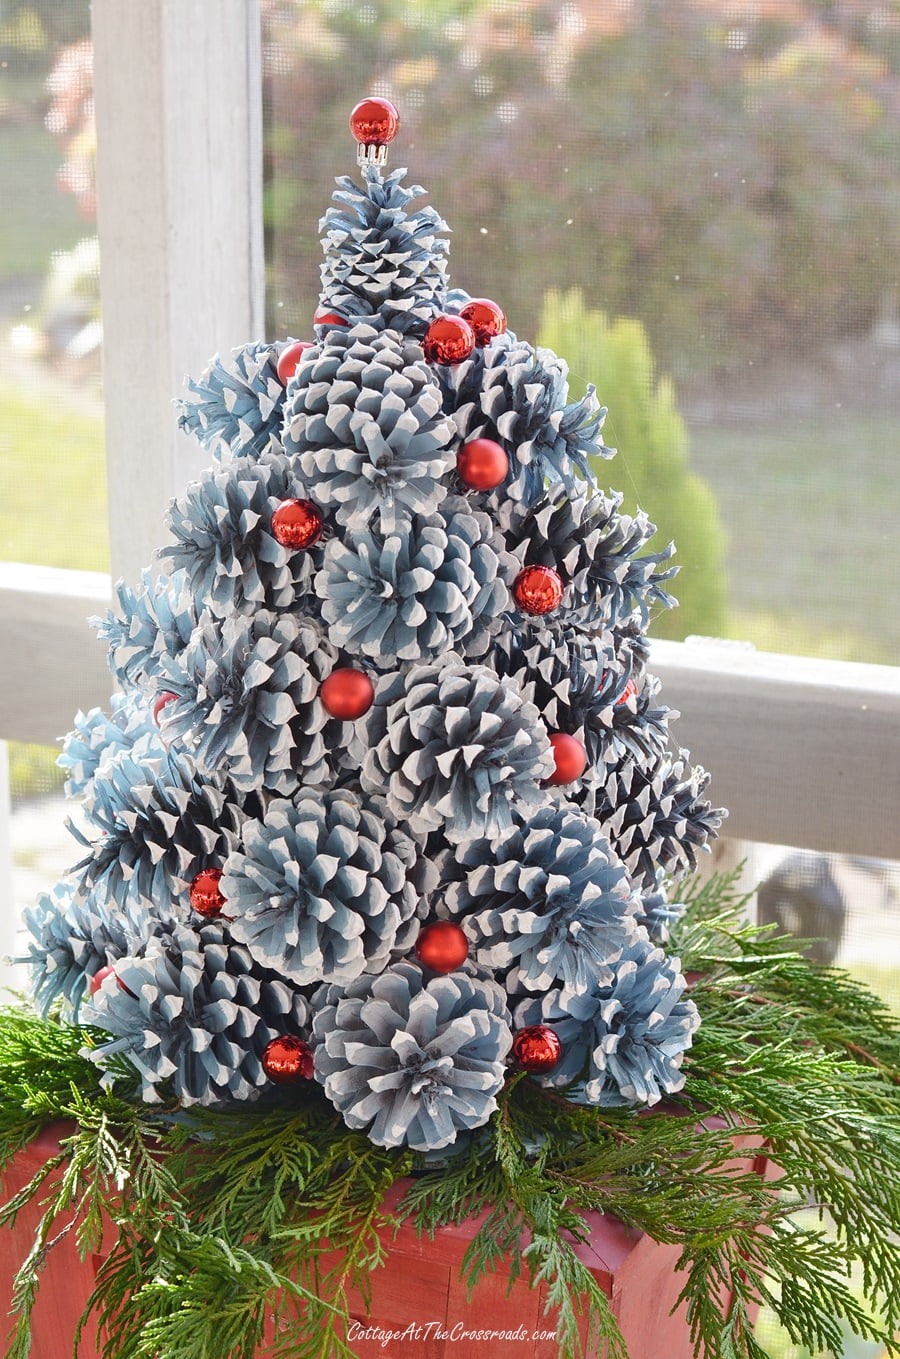 Visland Christmas Tree Topper Hat, Hat with Buffalo Plaid Bow Red Berry  Pine Cones , Christmas Tree Decorations Top Hat, Desktop Ornaments for Home  Holiday Winter Decor - Walmart.com